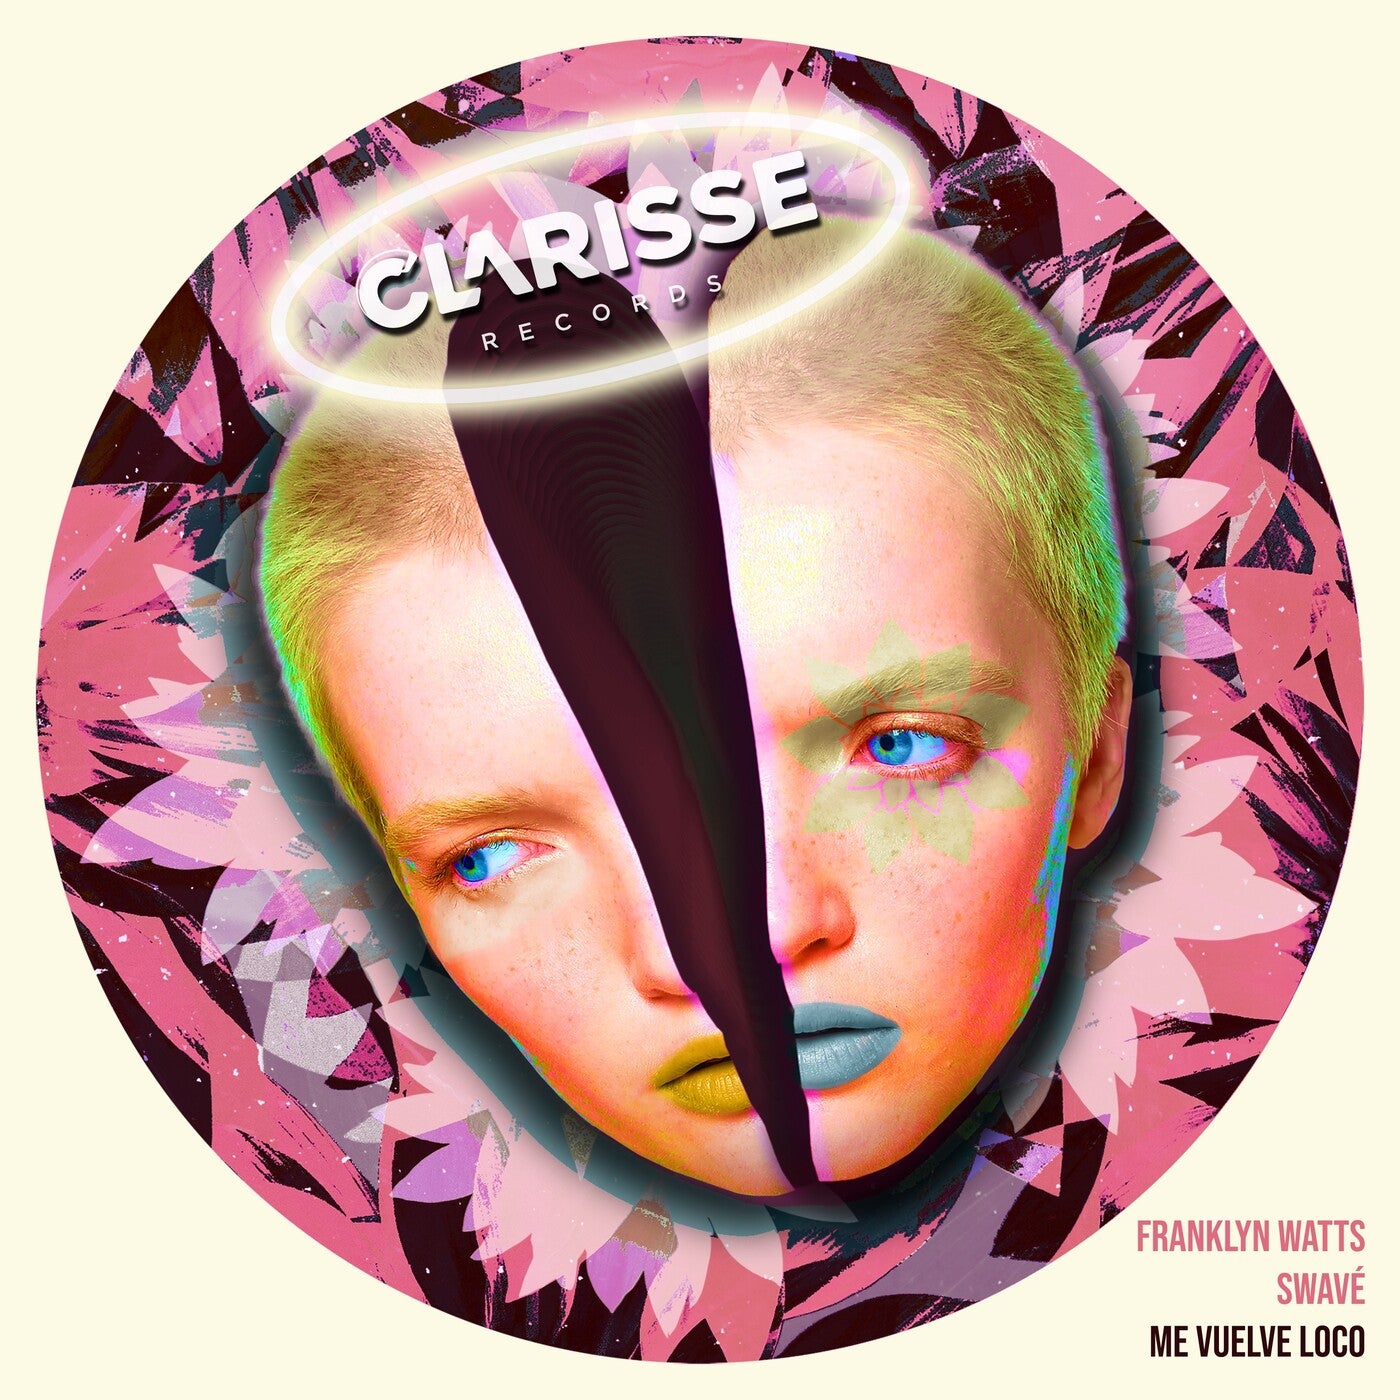 image cover: Franklyn Watts, Swavé - Me Vuelve Loco on Clarisse Records